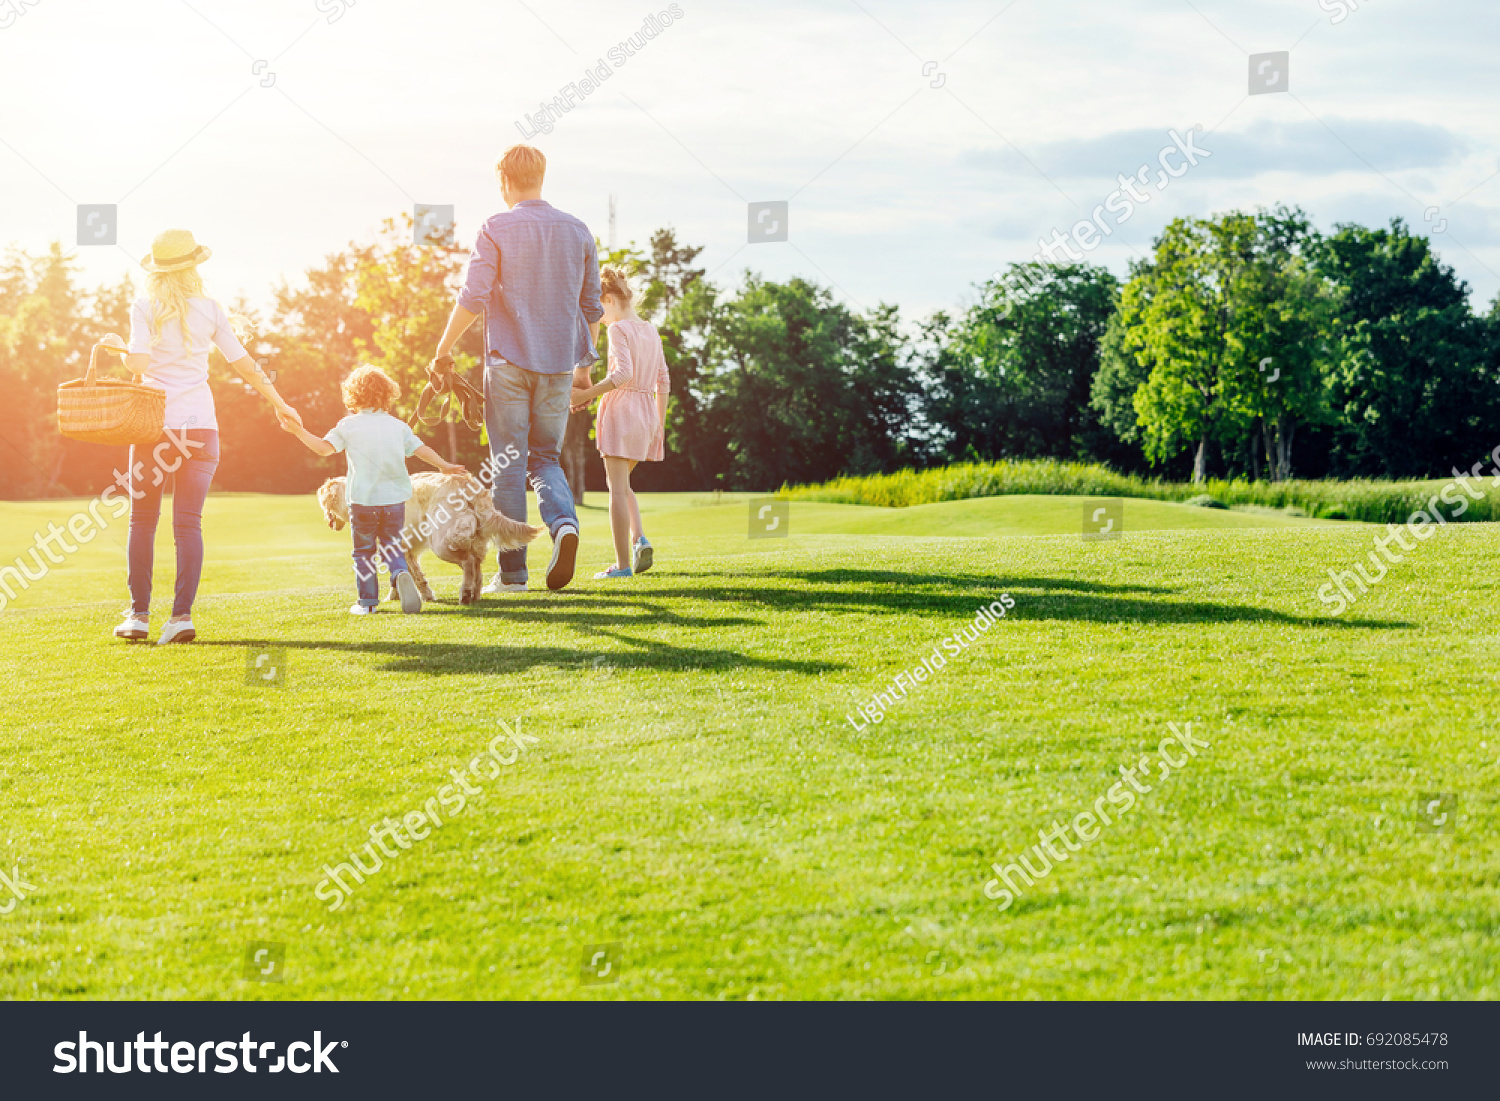 back view of family with pet walking on green meadow in park #692085478